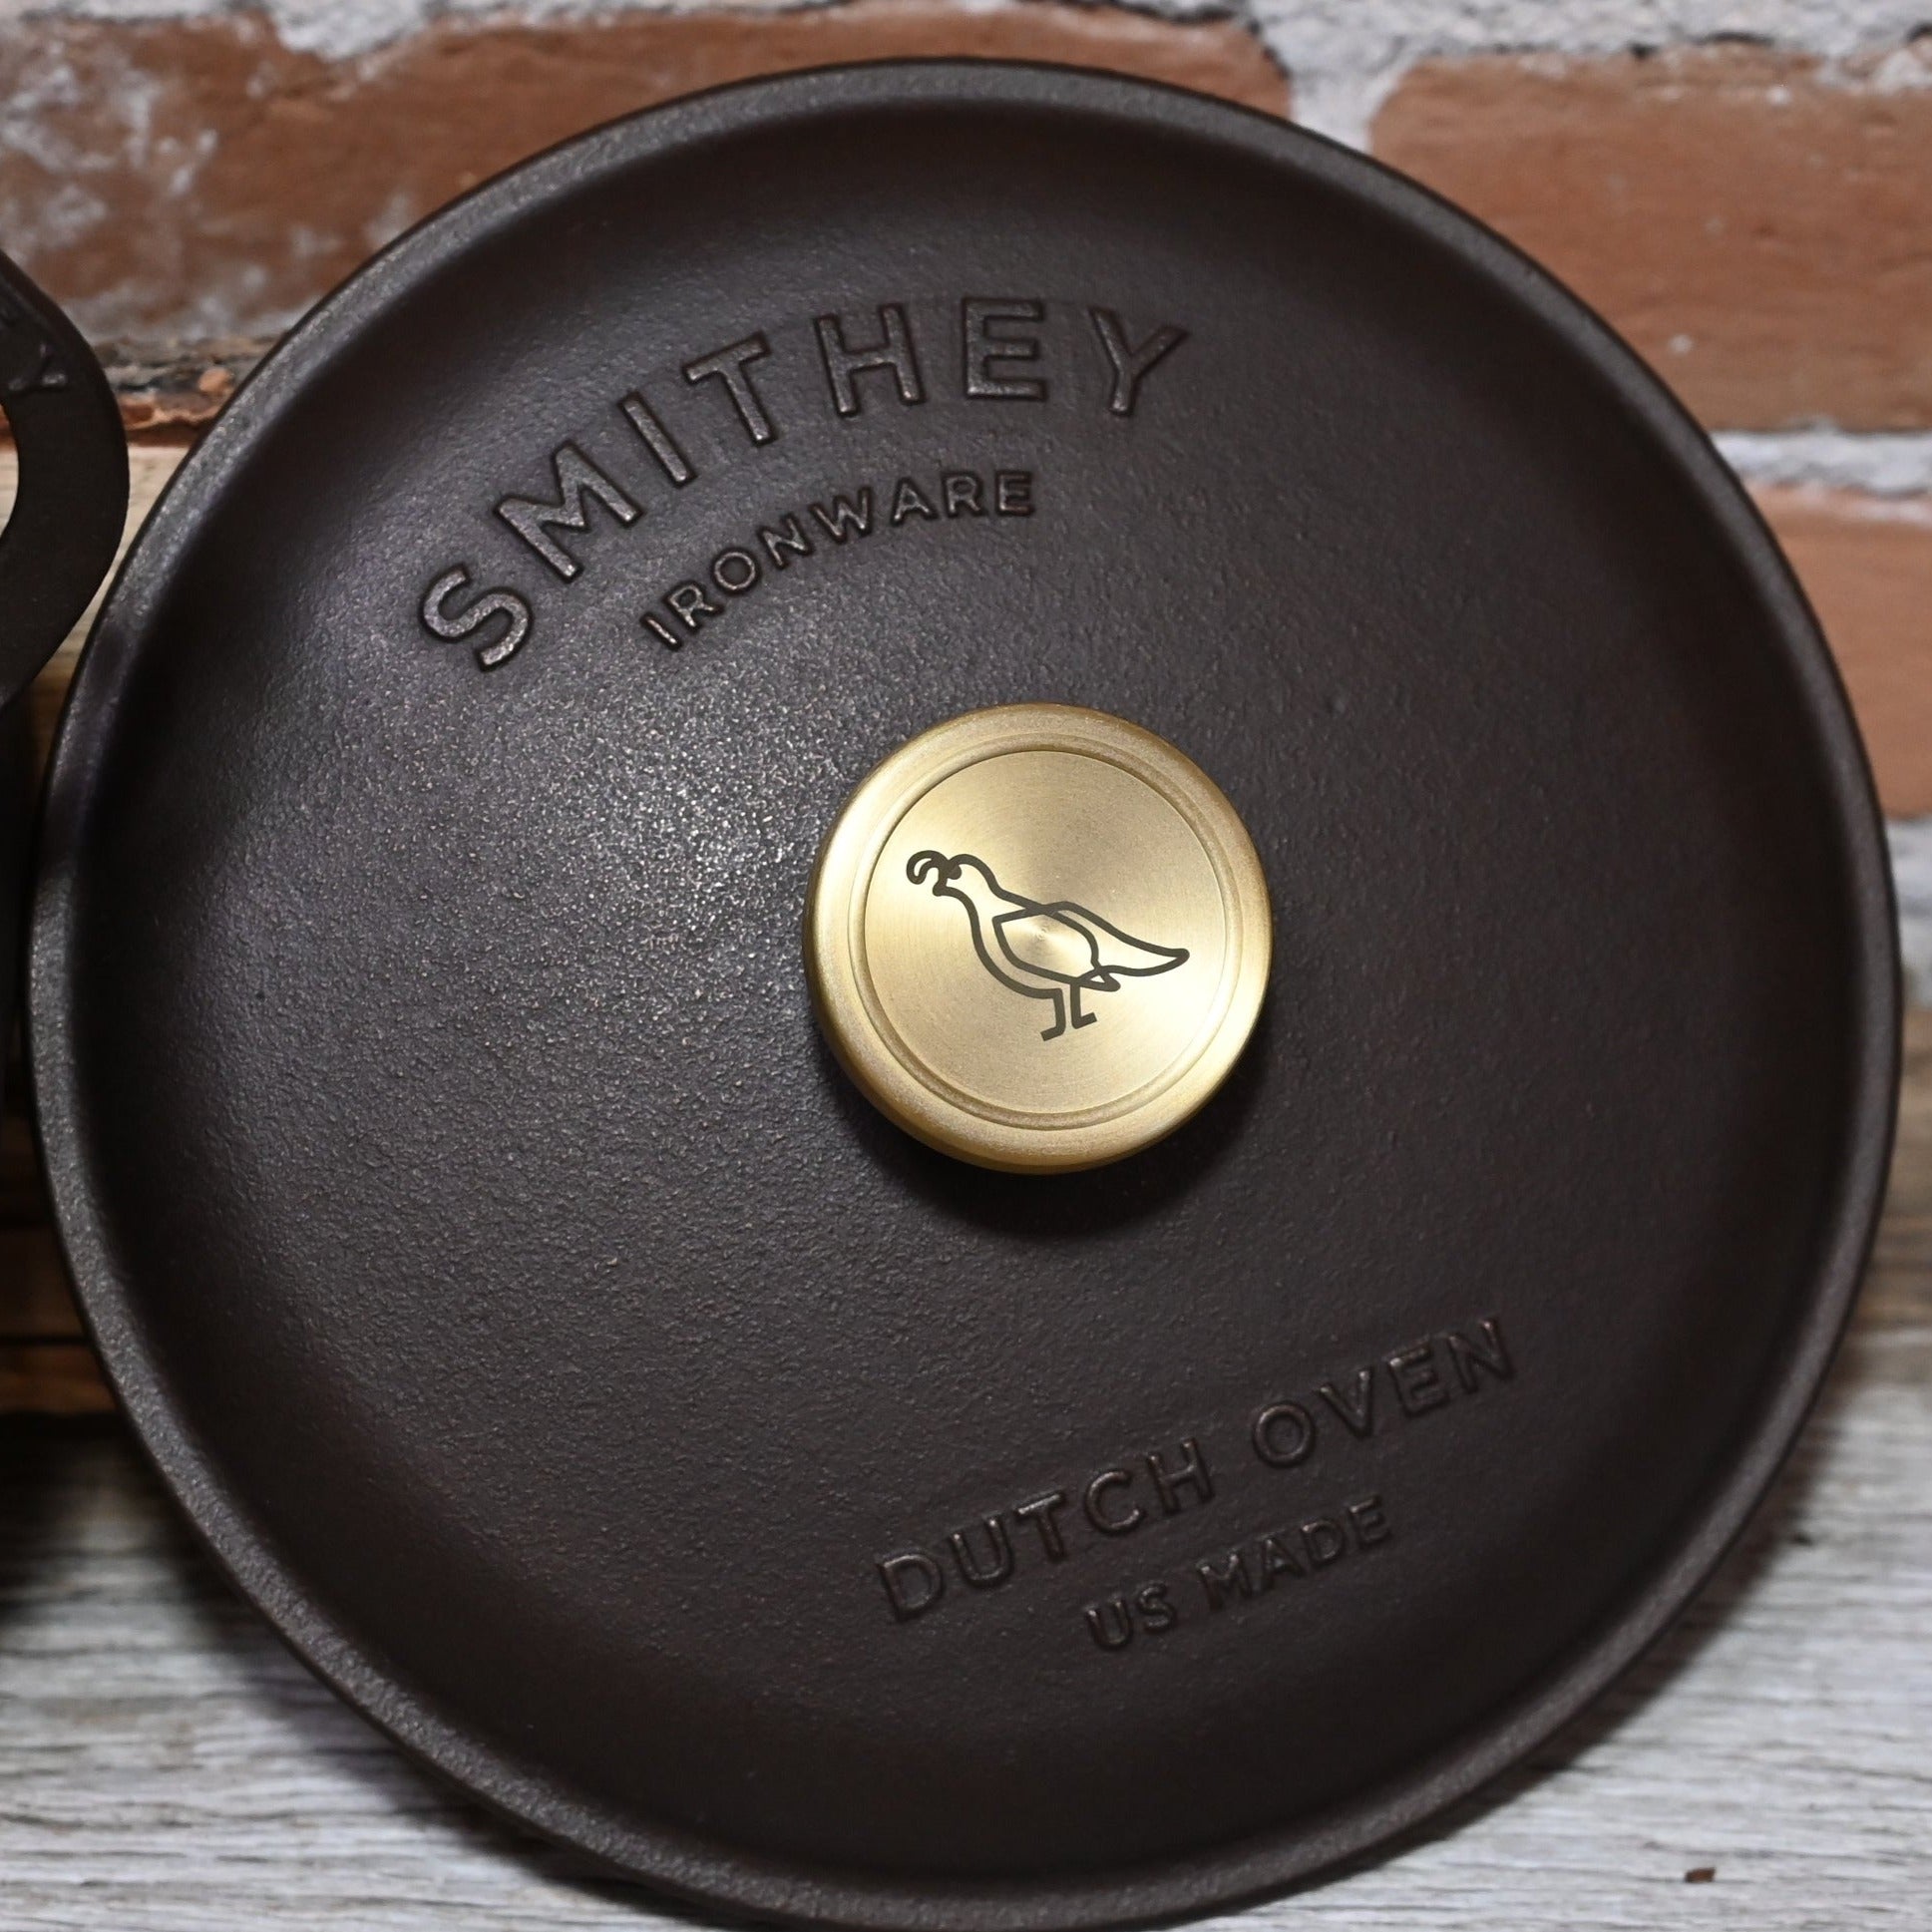 Smithey Dutch Oven 3.5qt view of lid of Dutch oven